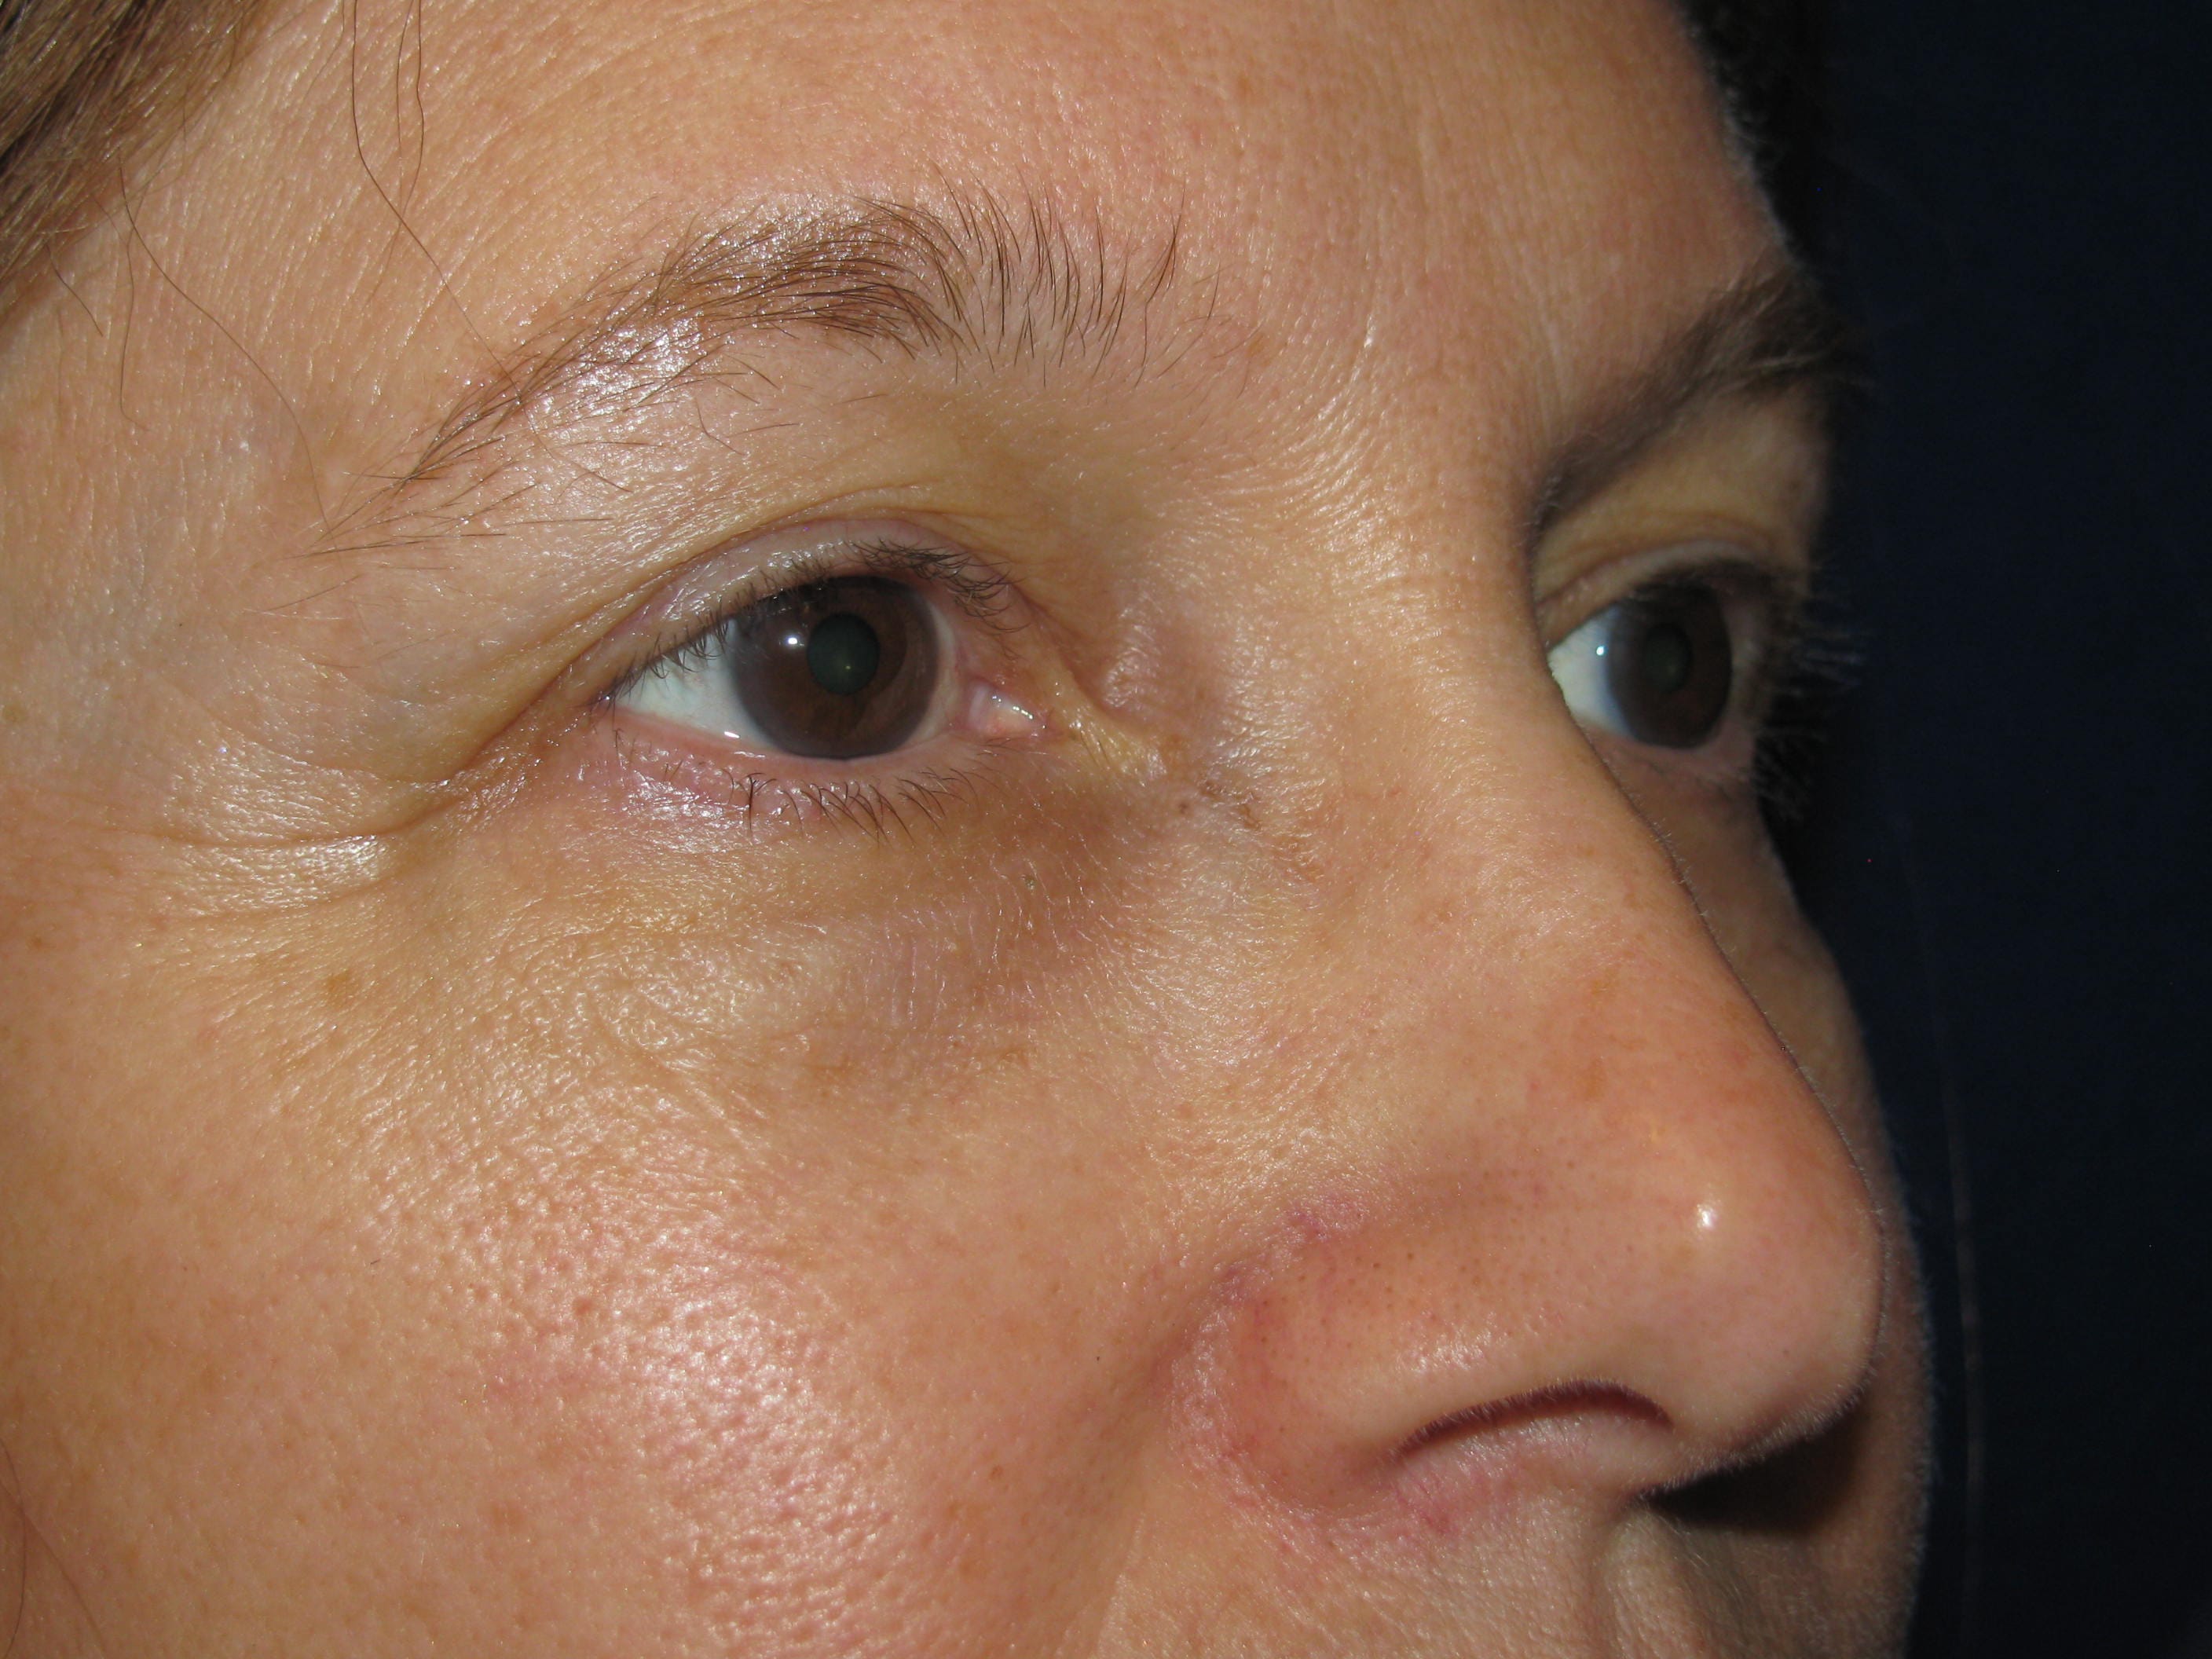 Upper Blepharoplasty Before and After | LV Plastic Surgery